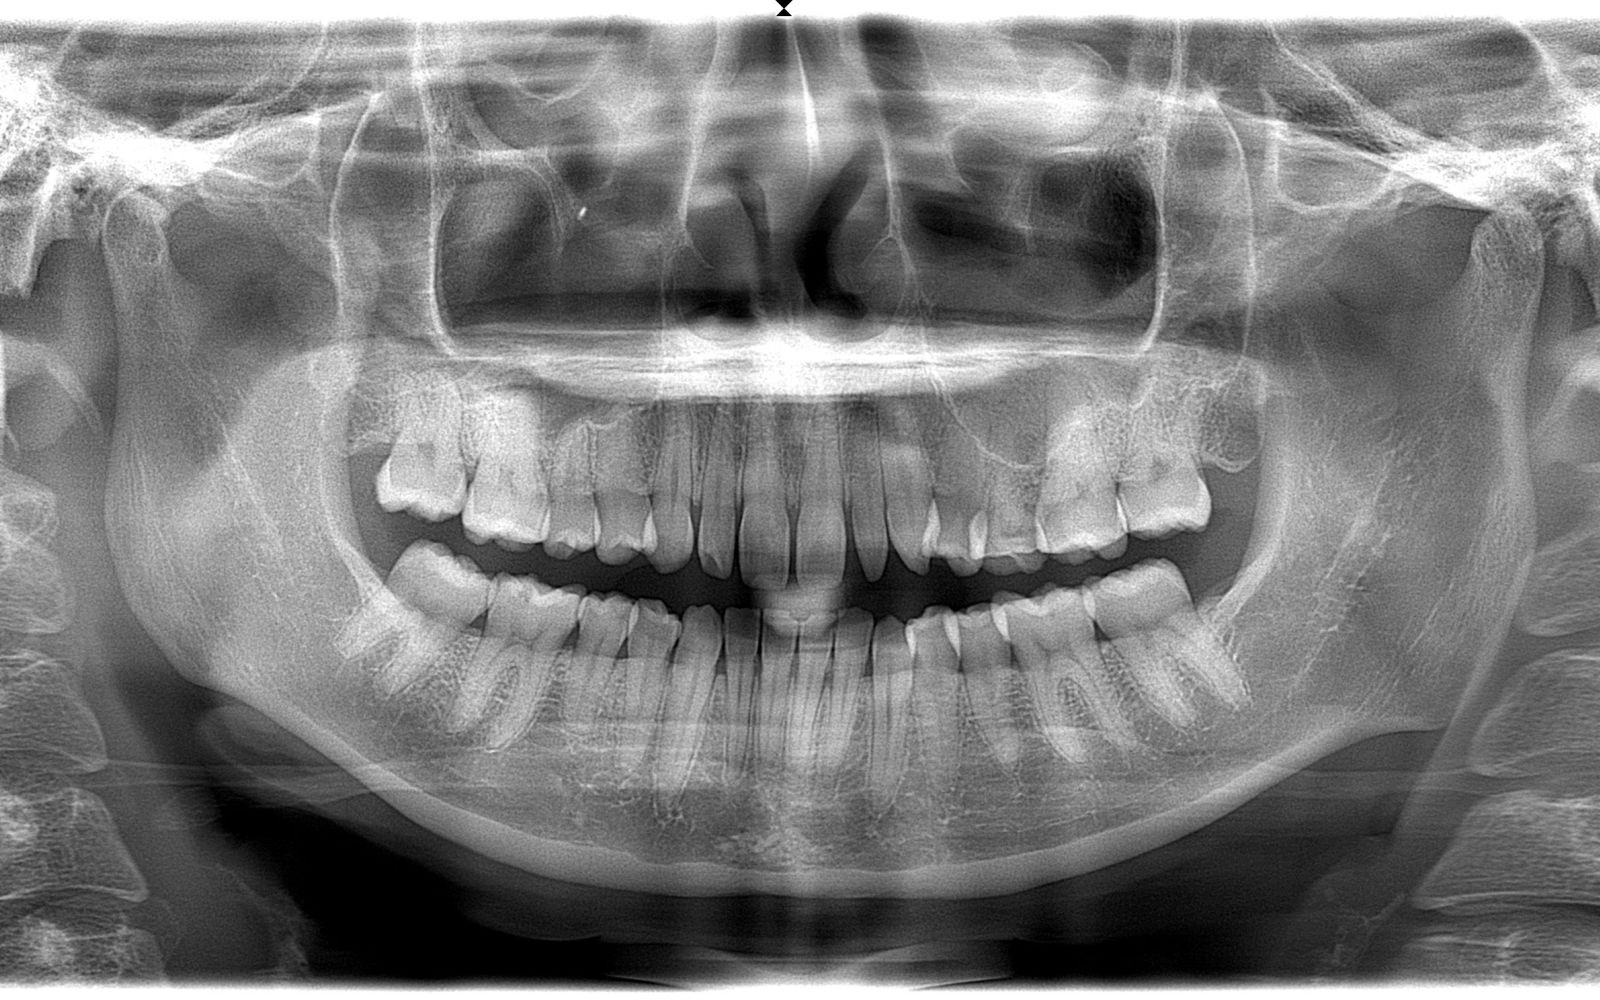 Peg Lateral in X-Ray Scan